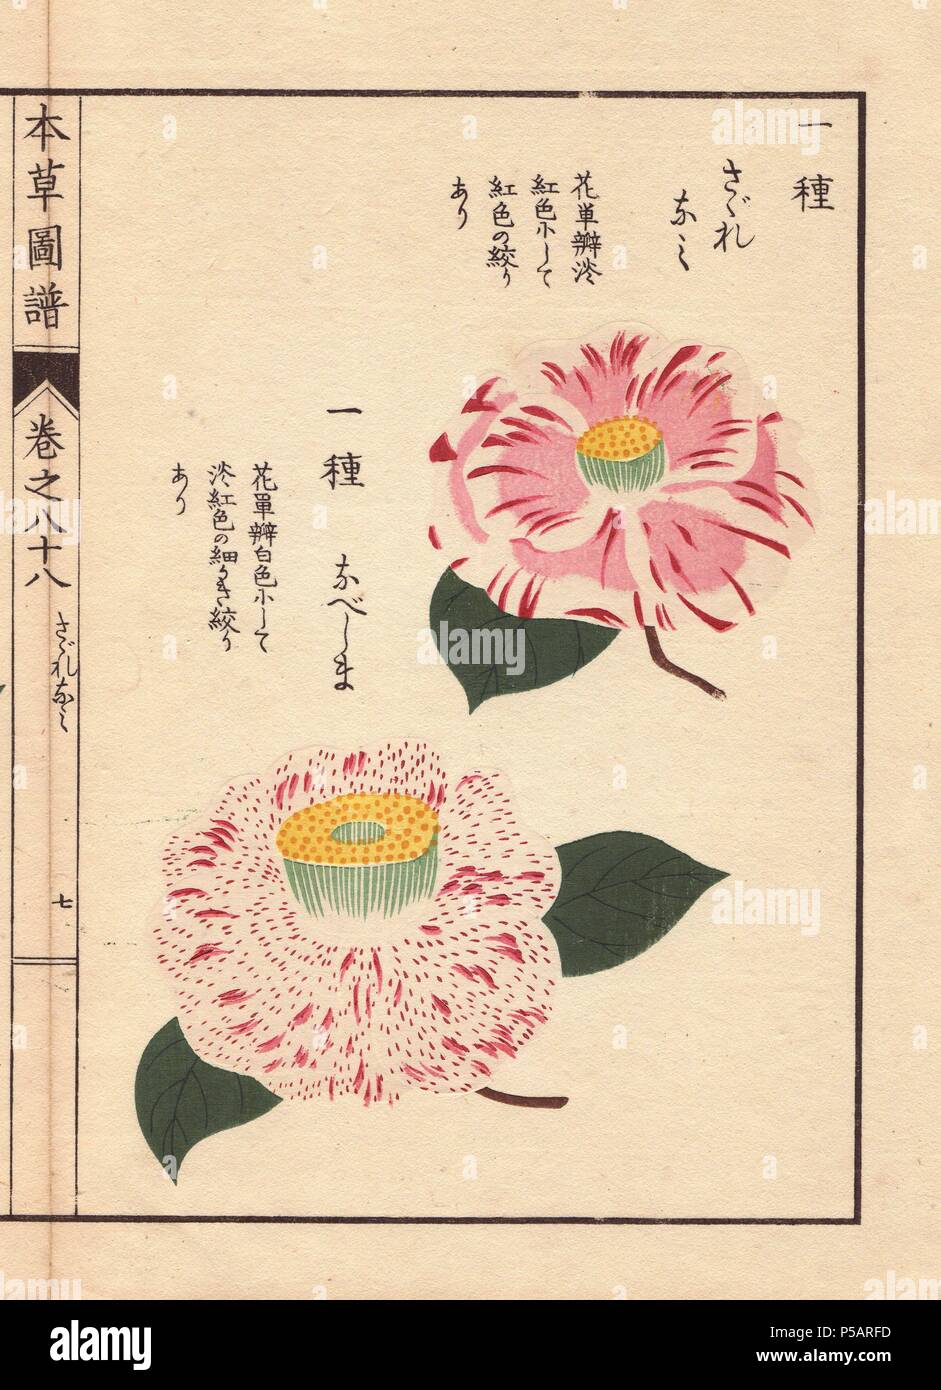 Pink and white camellias 'Sagurenami' and 'Nabeshima'. . Thea japonica Nois. forma. . Colour-printed woodblock engraving by Kan'en Iwasaki from 'Honzo Zufu,' an Illustrated Guide to Medicinal Plants, 1884. Iwasaki (1786-1842) was a Japanese botanist, entomologist and zoologist. He was one of the first Japanese botanists to incorporate western knowledge into his studies. Stock Photo